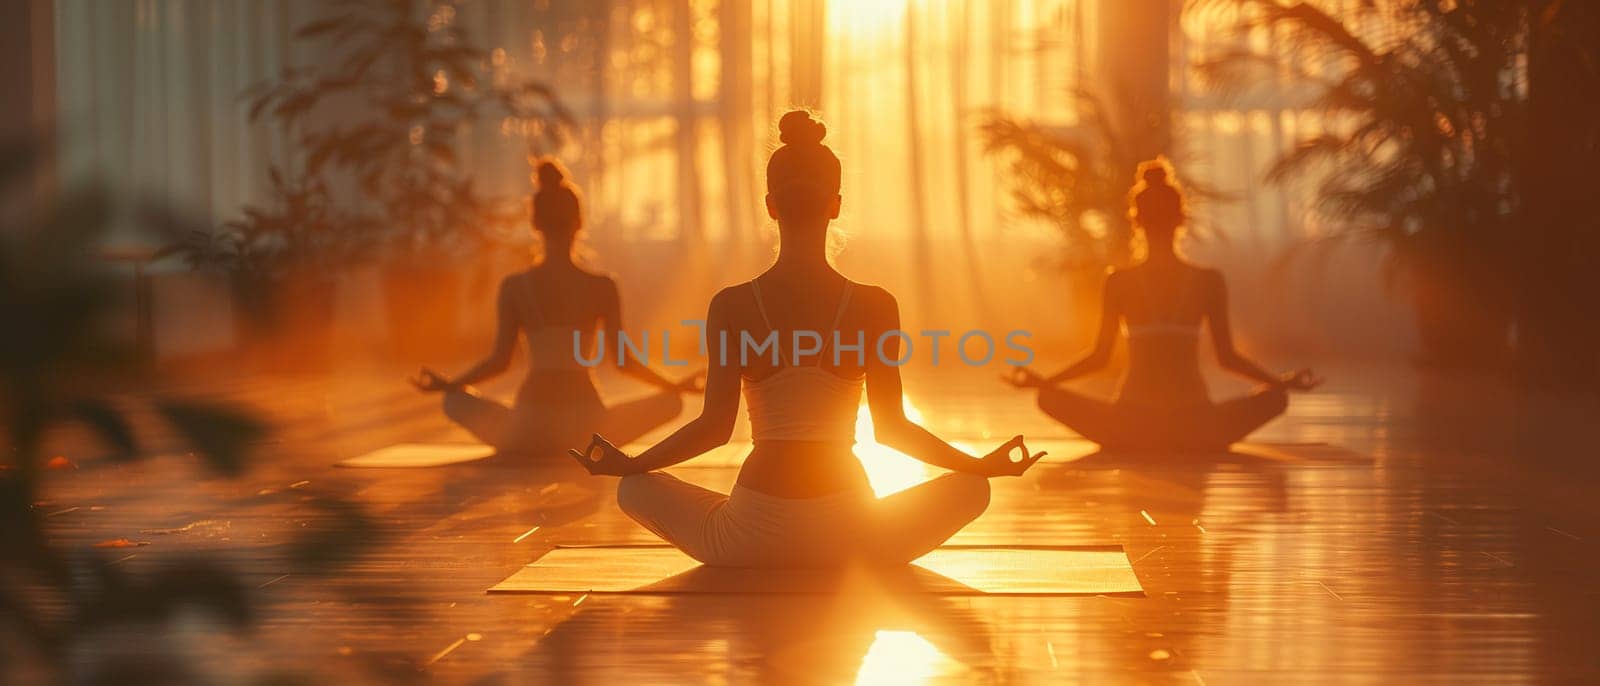 Serene Yoga Class in Session at a Sunlit Wellness Center, The tranquil blur of figures in poses against the morning light emphasizes balance and harmony.